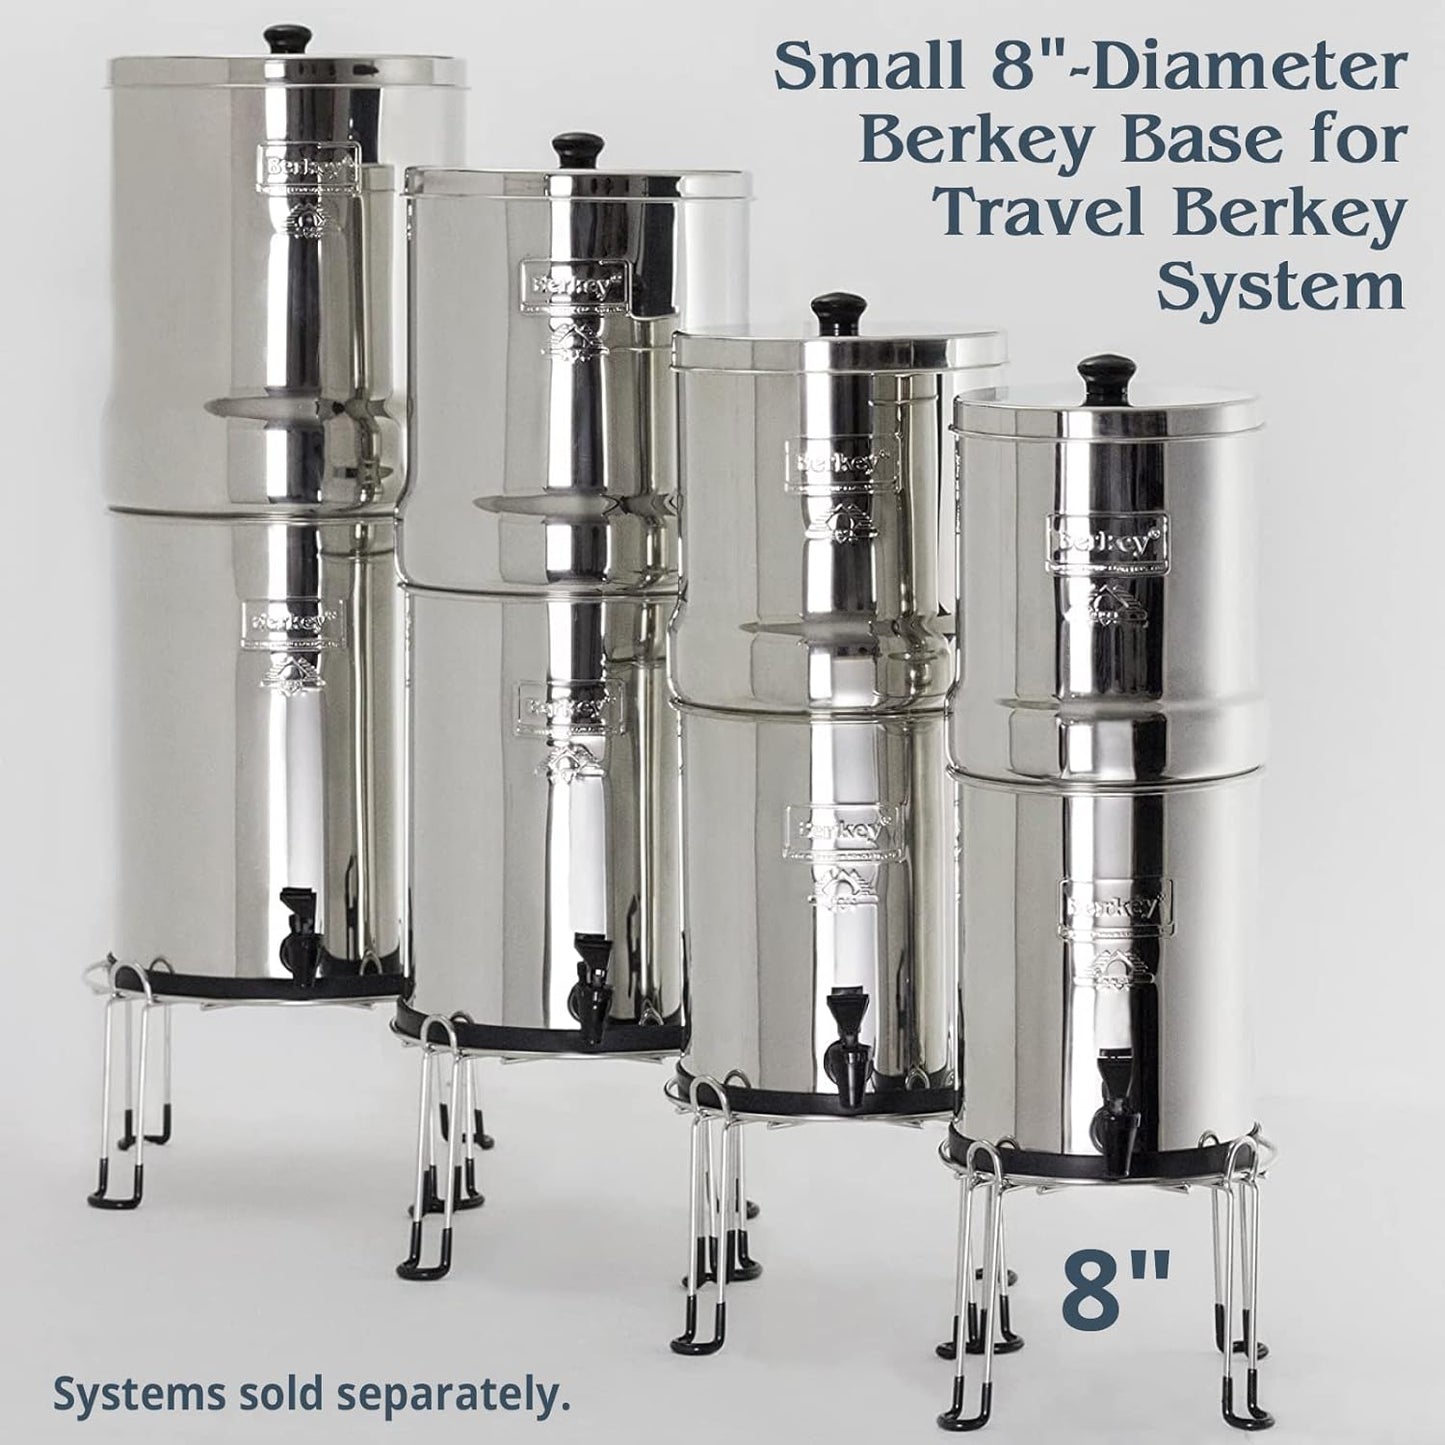 Small  Base Stainless Steel Stand Raises Your Travel  Water Filter System 6" above Countertop for Easier Dispensing of Filtered Water